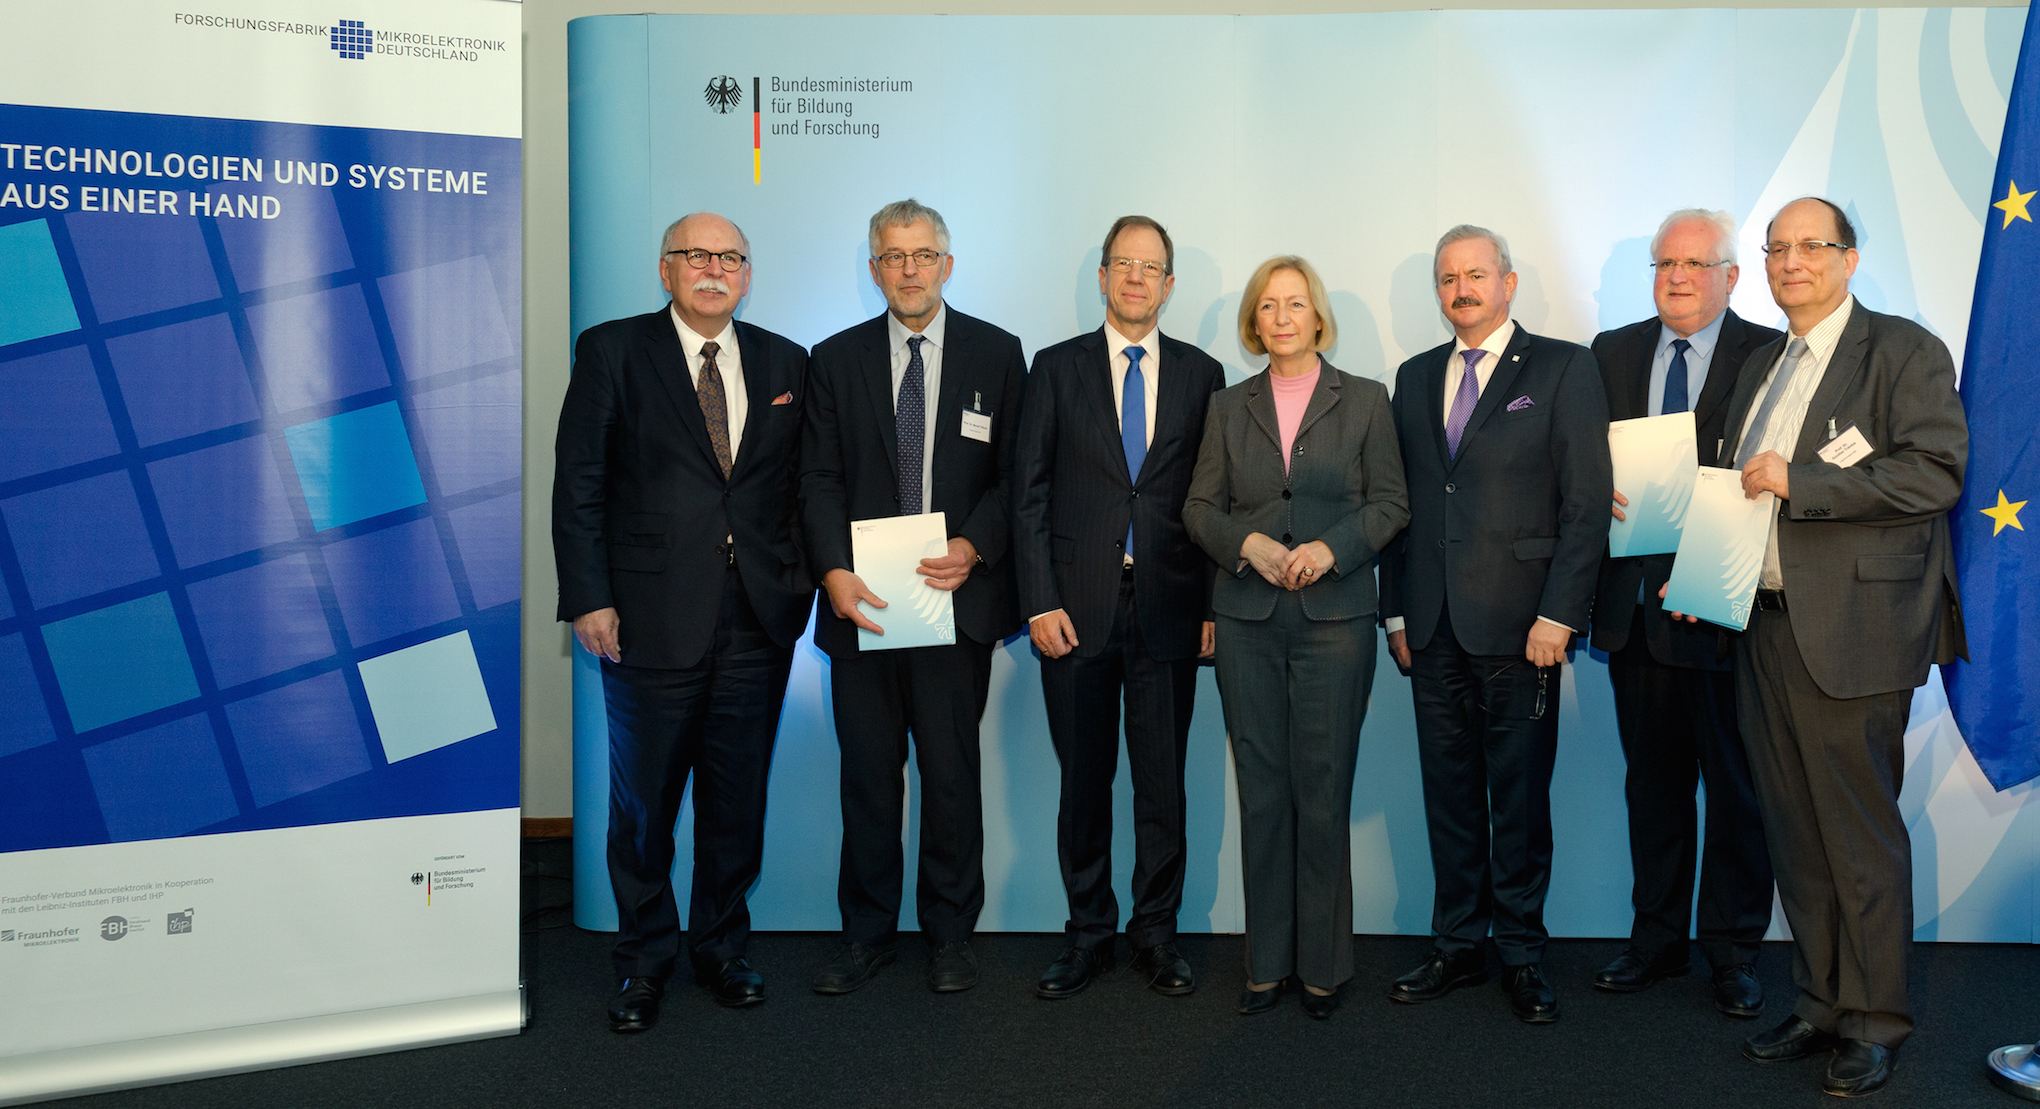 After handing over the grant approvals issued by the Federal Ministry of Education and Research (L-R):  Prof. Matthias Kleiner, President Leibniz Association, Prof. Bernd Tillack, Institute Director Leibniz Institute for Innovations for High Performance Microelectronics (IHP), Dr. Reinhard Ploss, CEO of Infineon AG, Prof. Johanna Wanka, Federal Research Minister, Prof. Reimund Neugebauer, President Fraunhofer-Gesellschaft, Prof. Hubert Lakner, Chairman Fraunhofer Group for Microelectronics, Prof. Günther Tränkle, Institute Director Ferdinand Braun Institute, Leibniz-Institut für Höchstfrequenztechnik (FBH). 